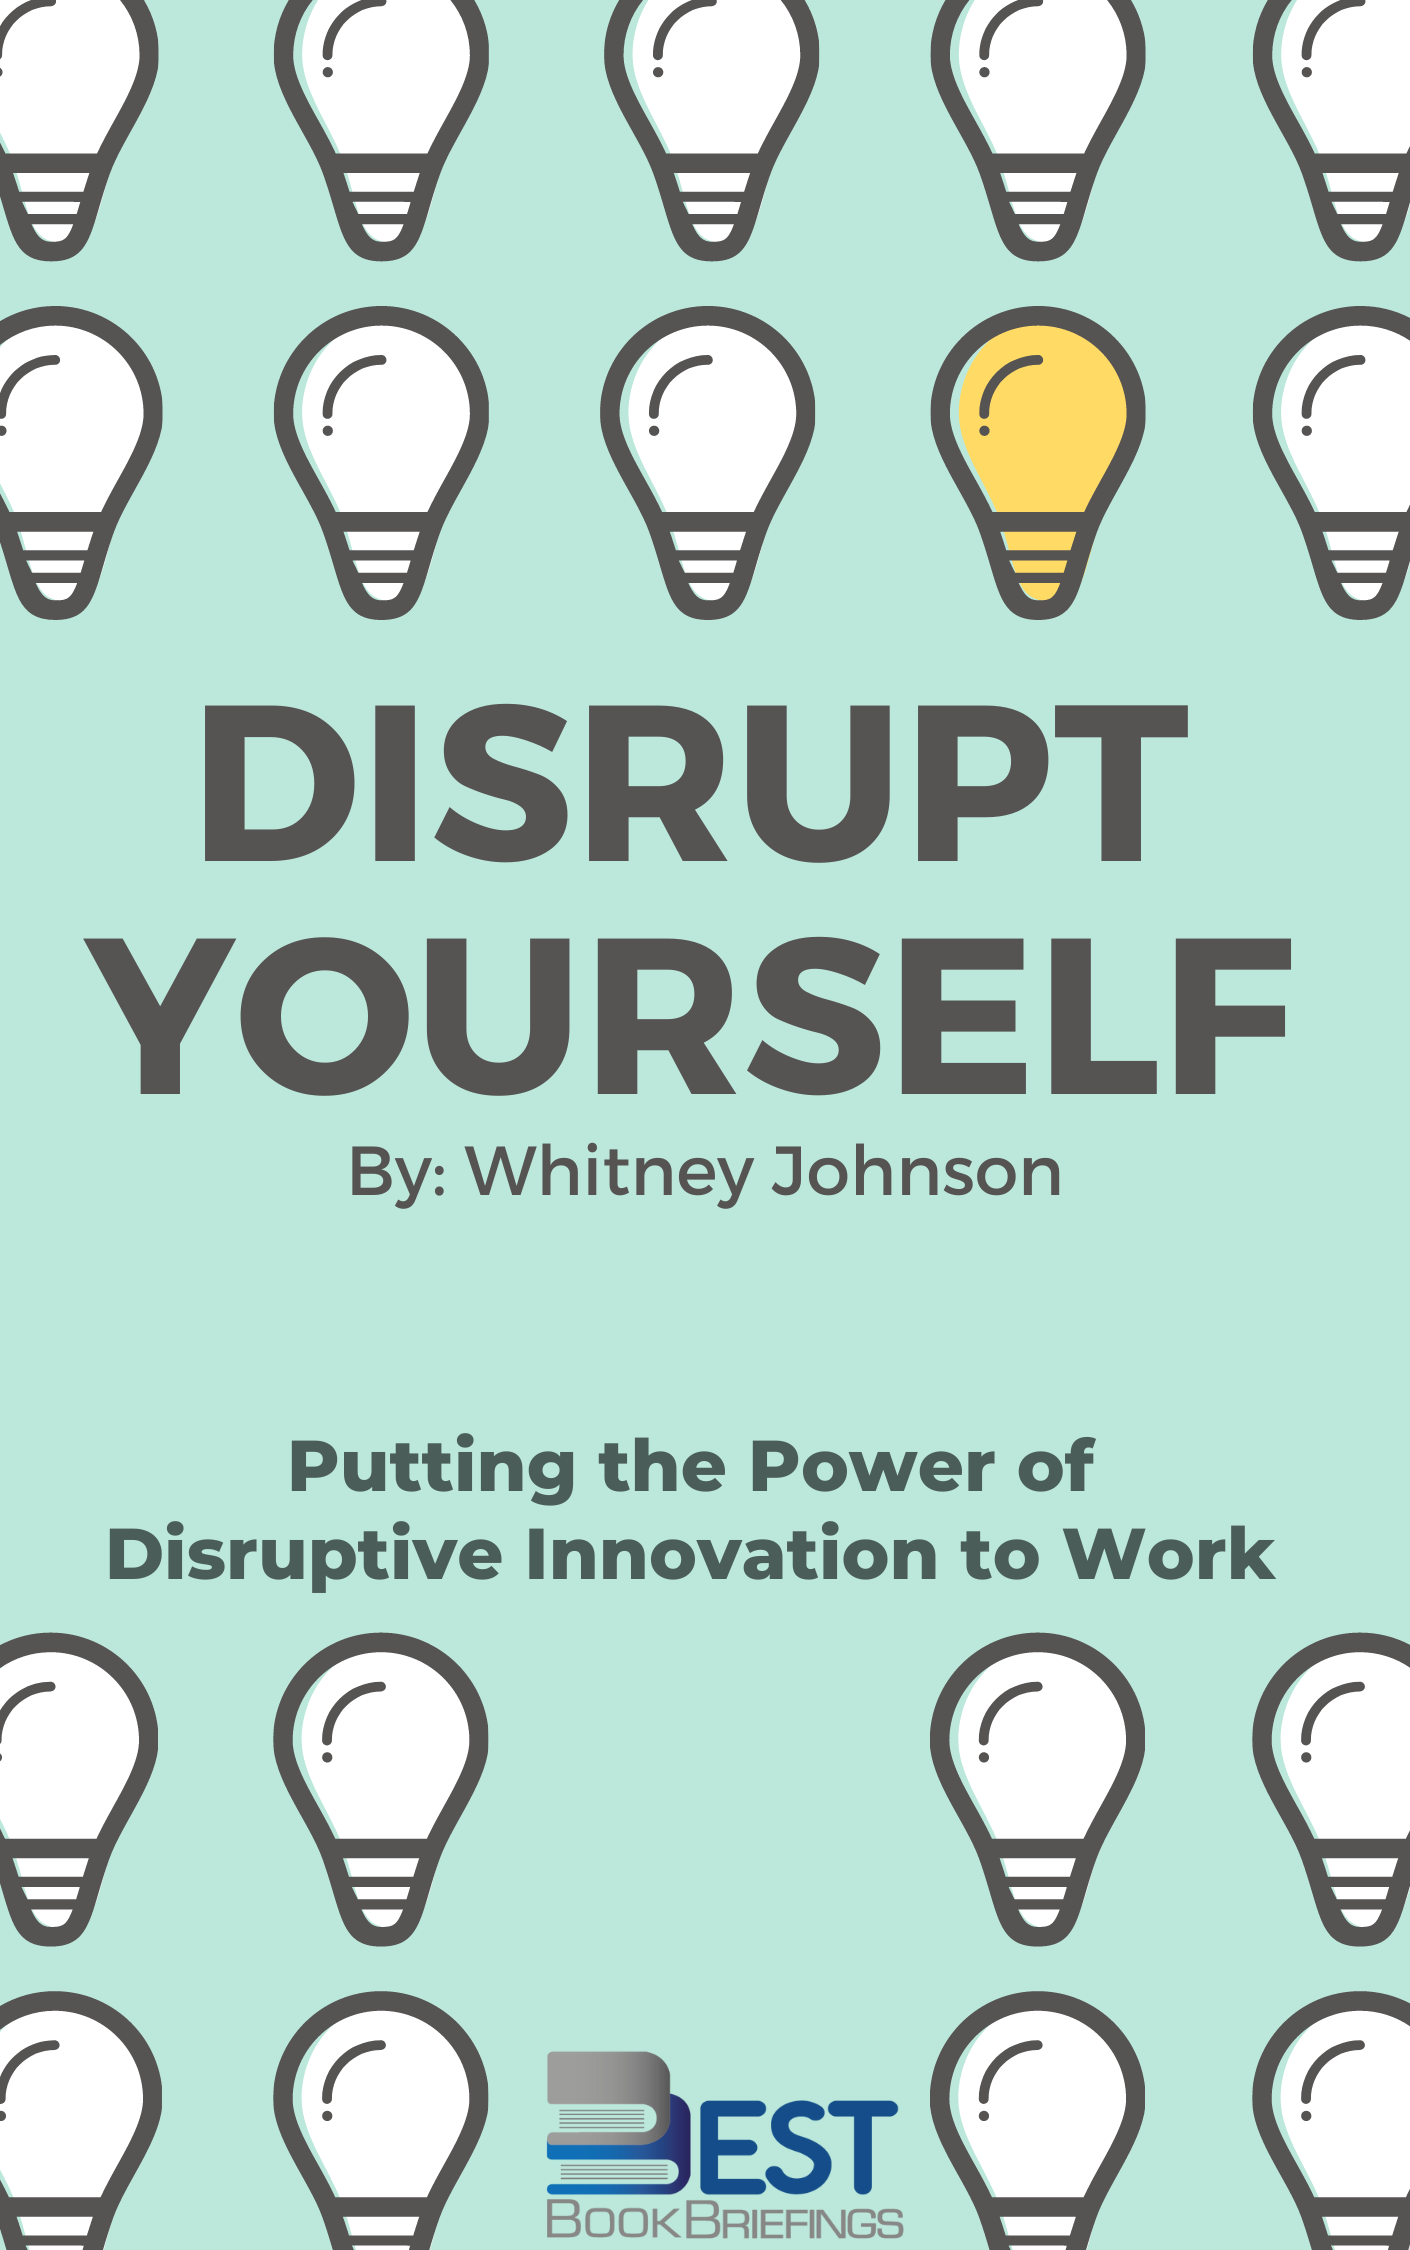 Whitney Johnson wants you to consider this simple, yet powerful, idea: disruptive companies and ideas upend markets by doing something truly different—they see a need, an empty space waiting to be filled, and they dare to create something for which a market may not yet exist. In Disrupt Yourself, Johnson helps 